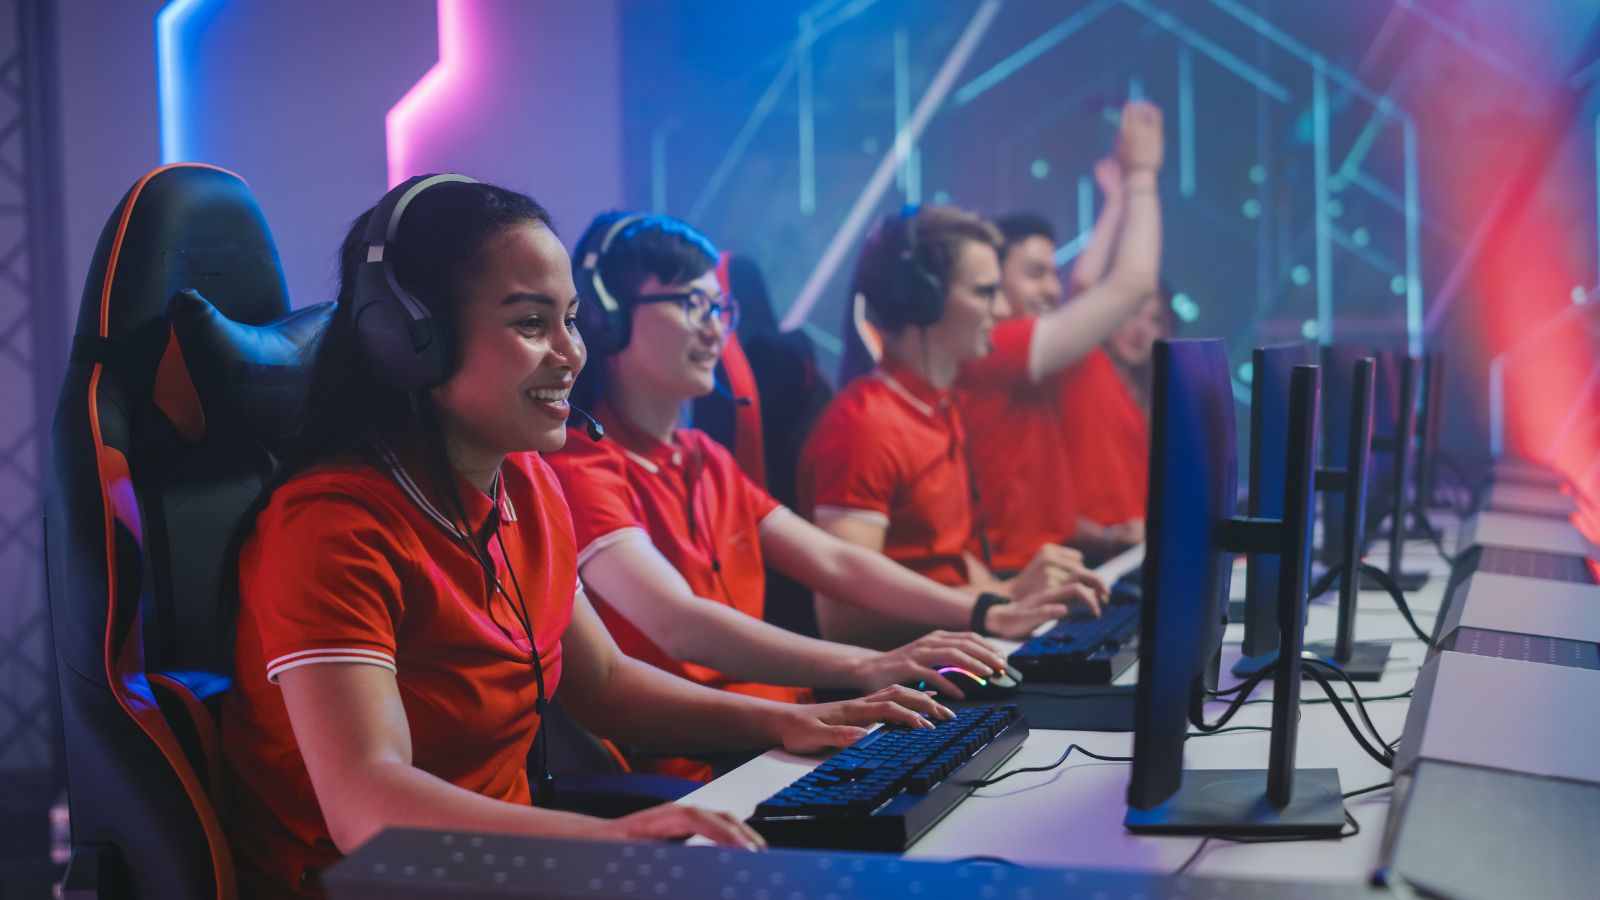 Breaking Barriers: Raytheon UK’s virtual Cyber Academy offers accessible expert training to cyber security university undergraduates hoping to overturn the industry skills gap.